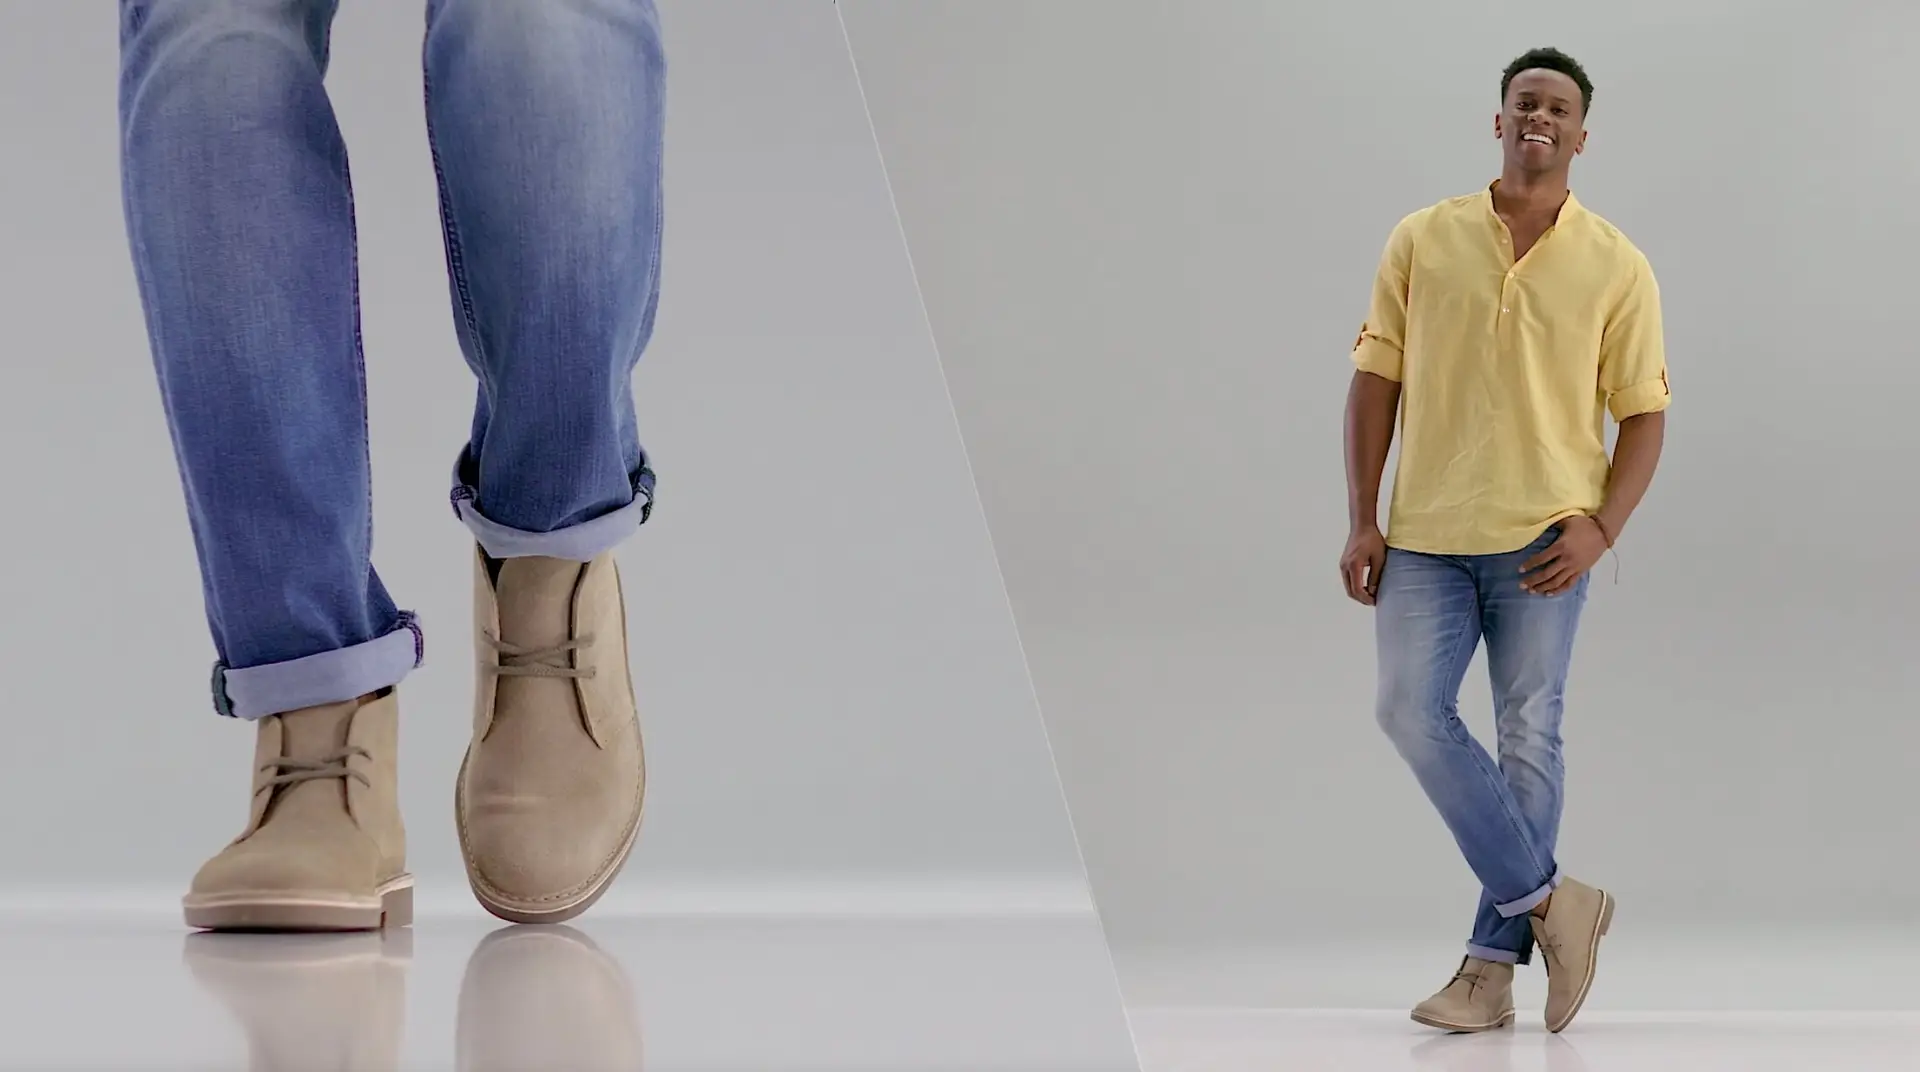 Two pictures showcase a man in jeans and a yellow shirt, looking stylish in his Every Season Clarks.